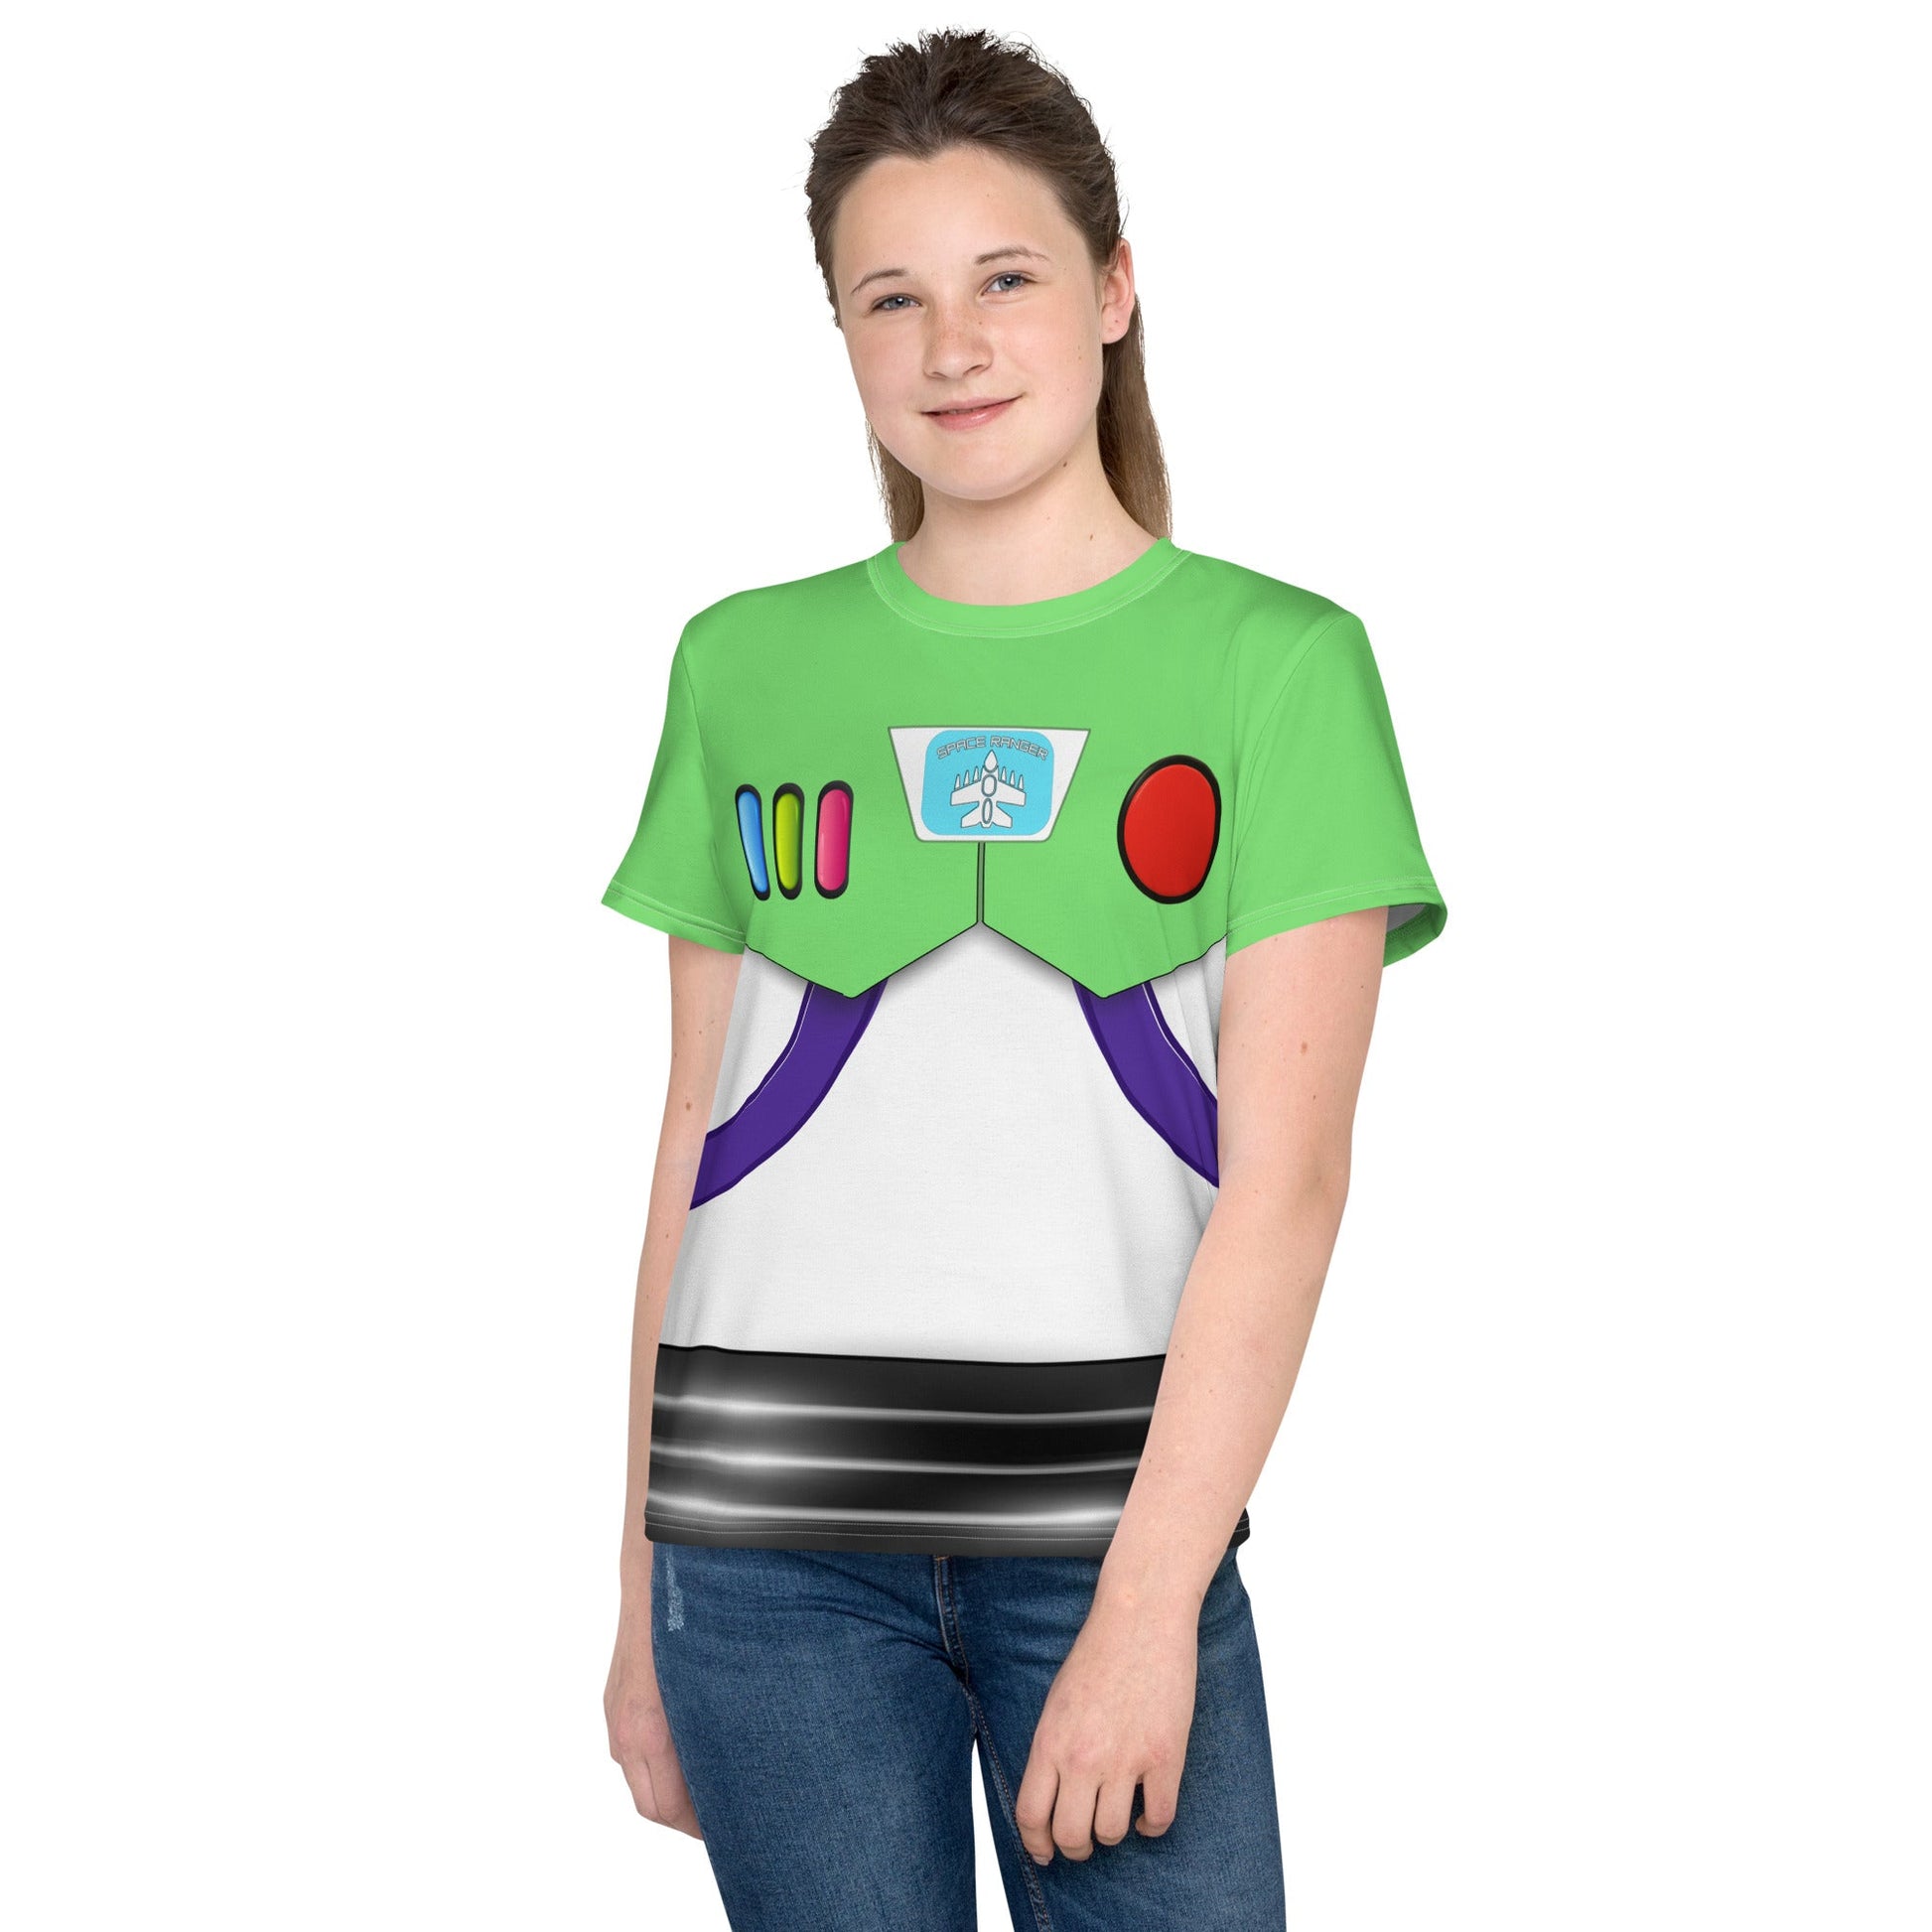 The Buzz Youth crew neck t-shirt- Running Costume, Cosplay, Bounding adult disneybuzz lightyearbuzz lightyear dress#tag4##tag5##tag6#